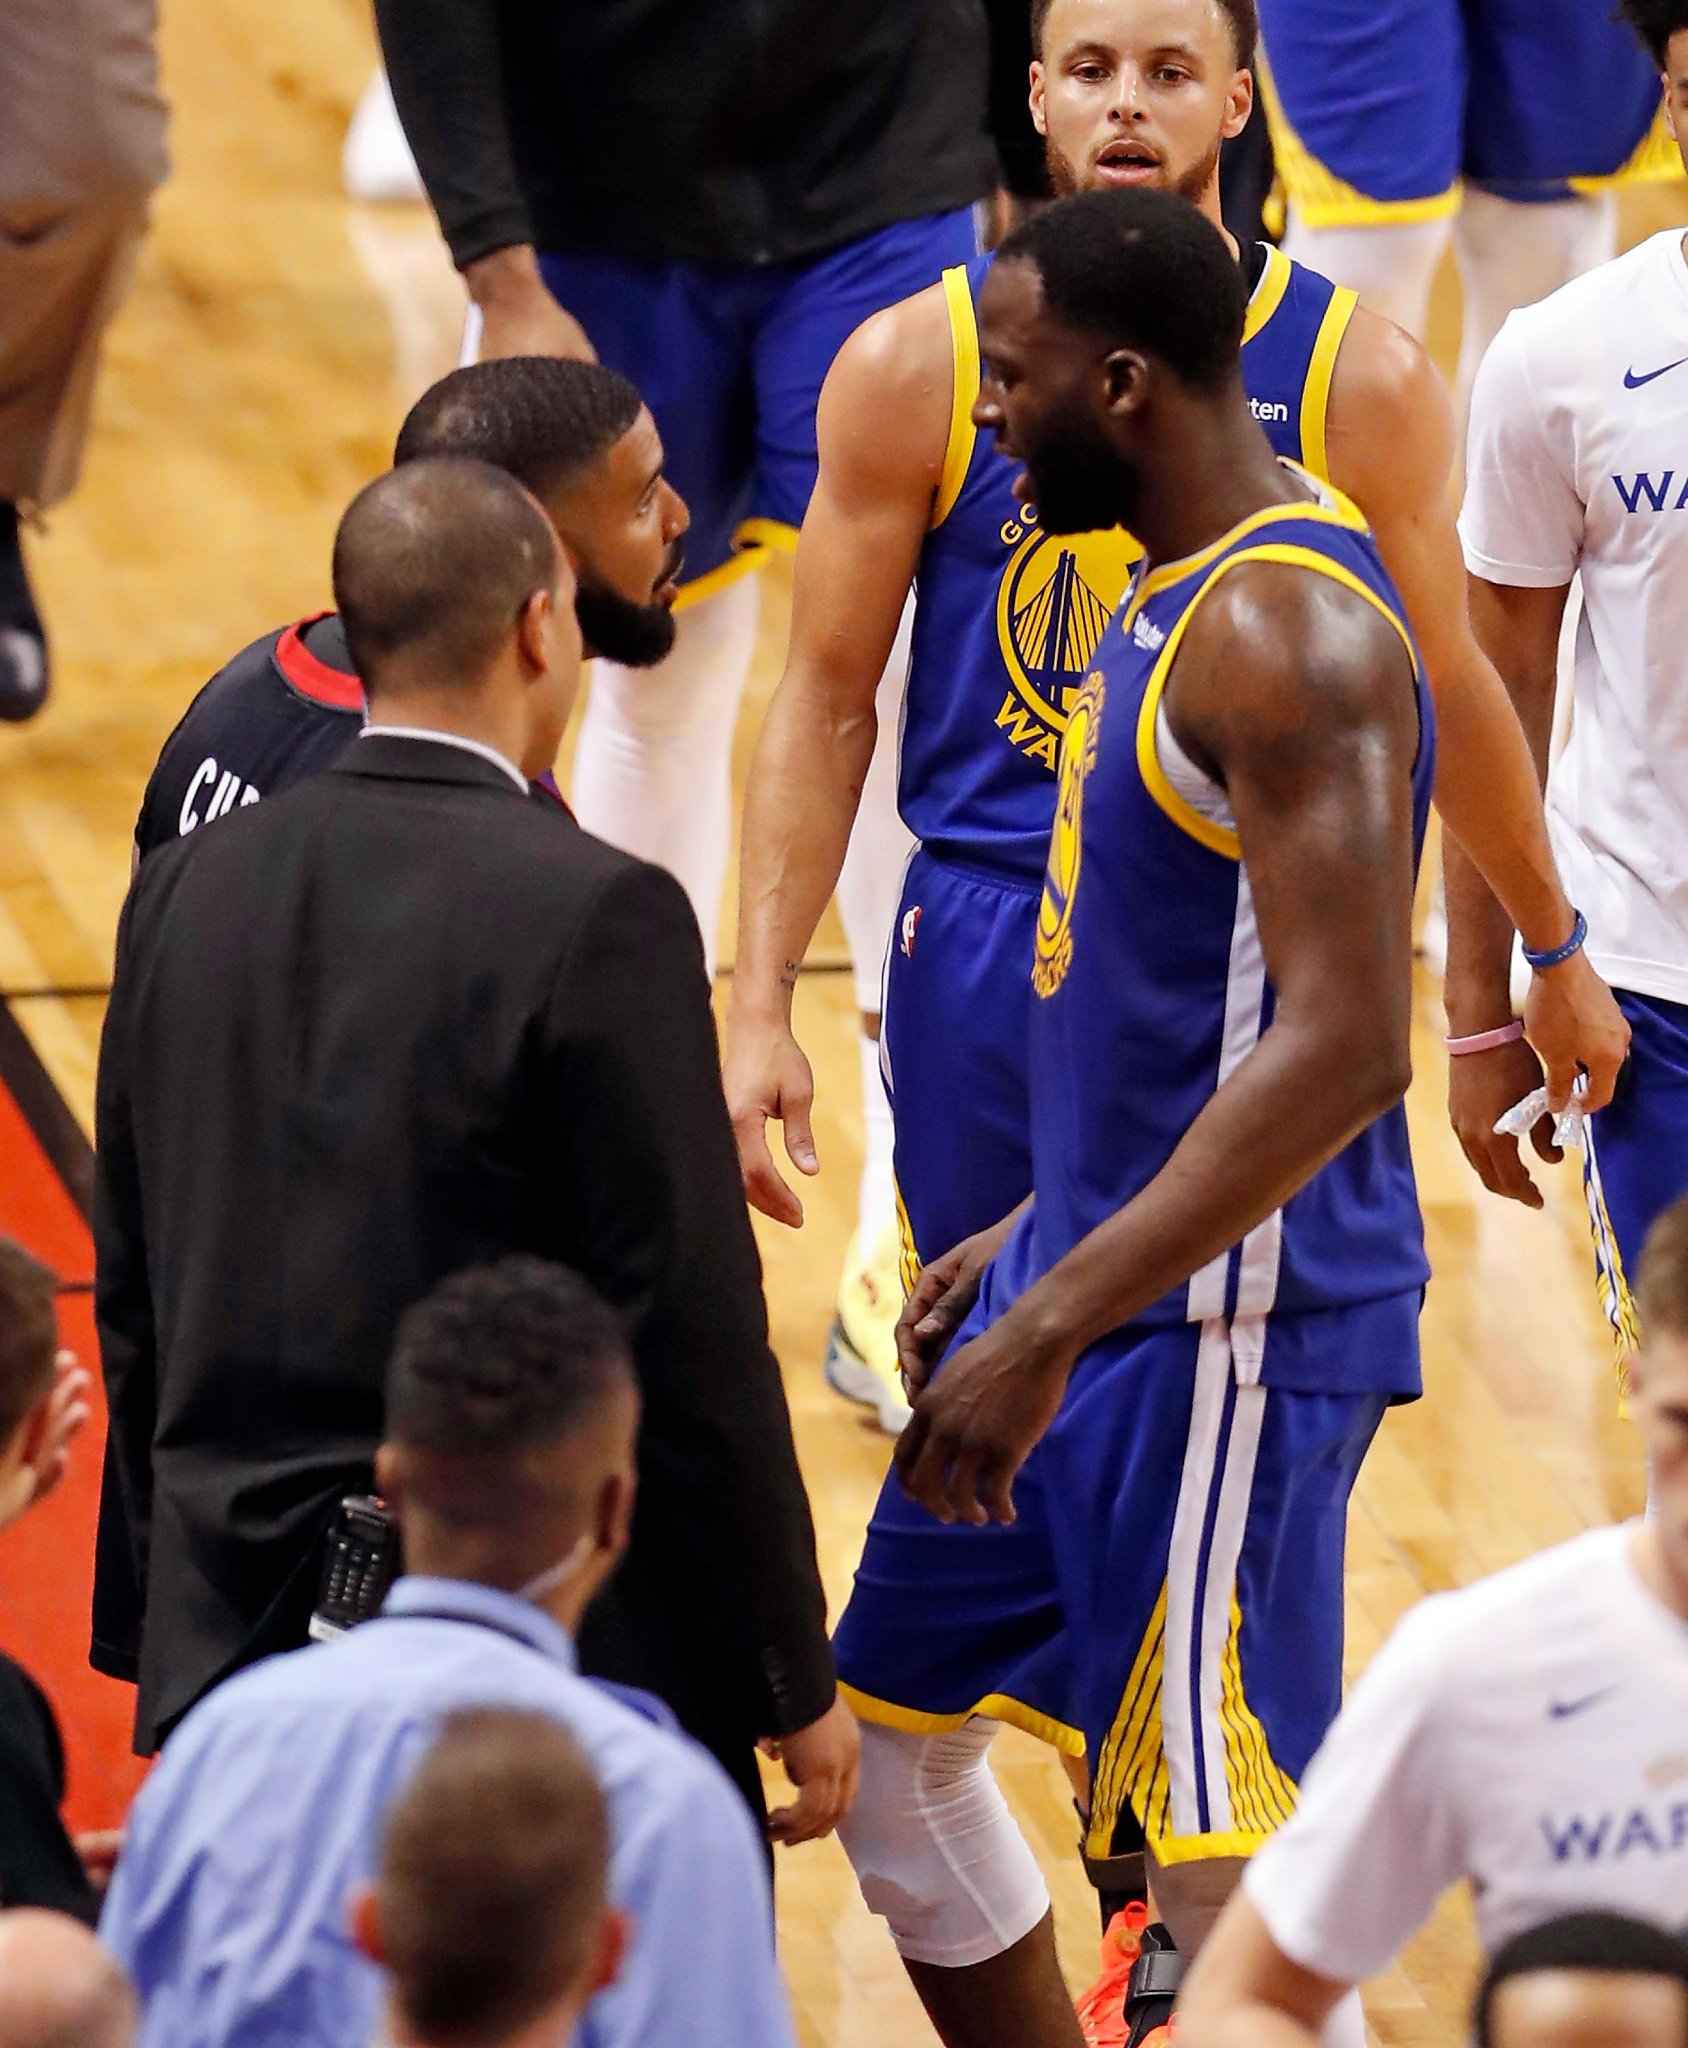 Pamm Drake and Other Alamedans Dance at Warriors Games